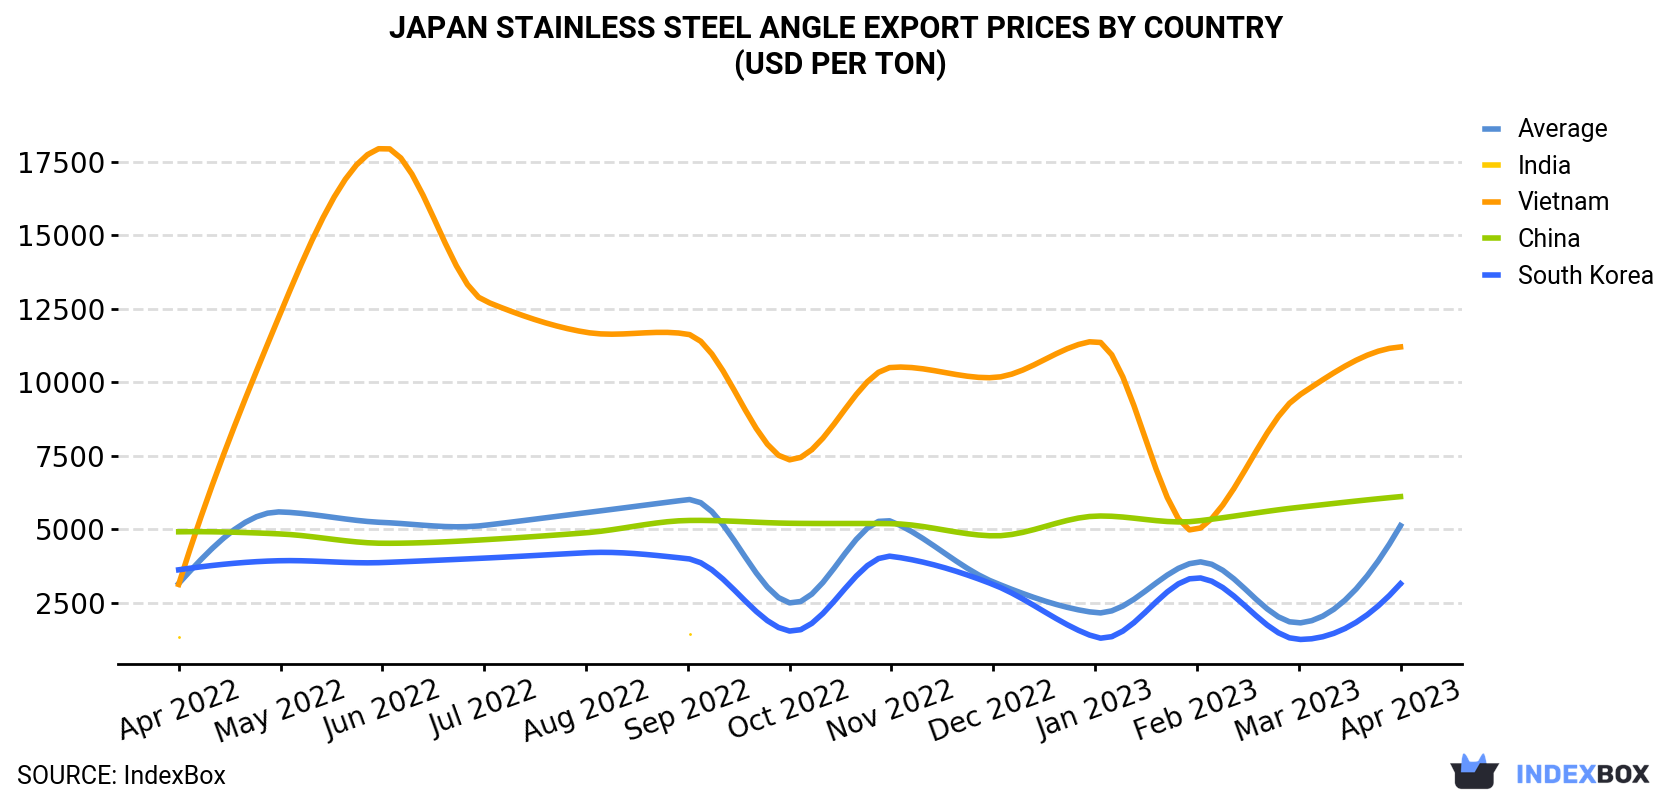 Japan Stainless Steel Angle Export Prices By Country (USD Per Ton)